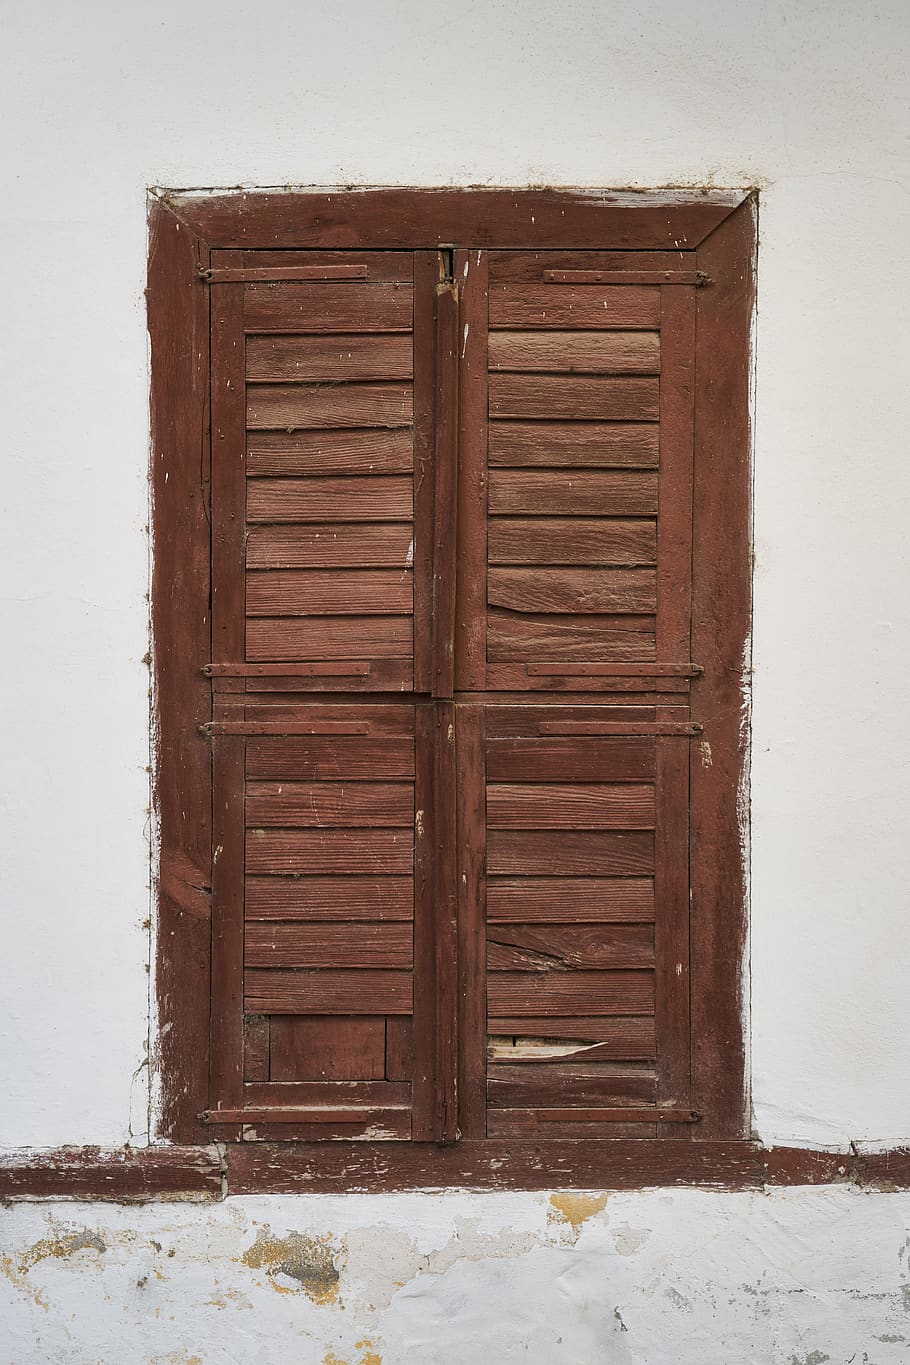 wood, door, wood-fibre boards, introduction, architecture, old, building, closed, key, symbol